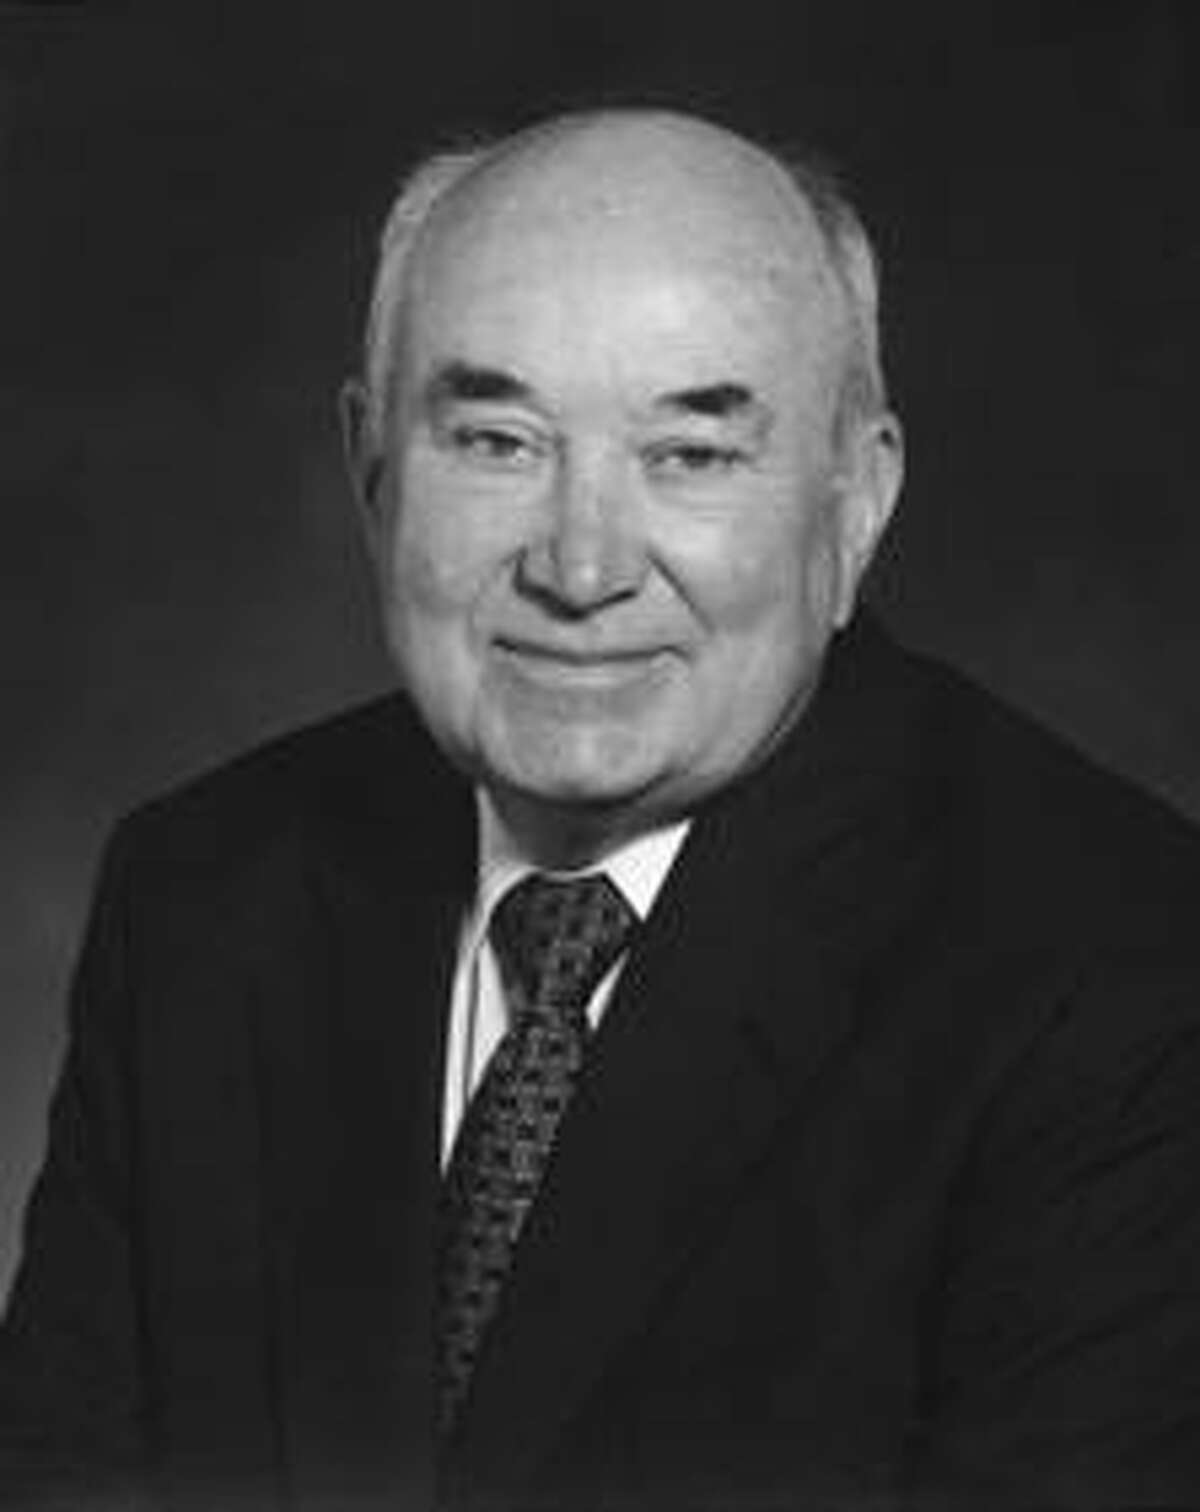 Perry Adkisson, former Texas A&M chancellor and nationally recognized entomologist, died in late June. Photo credit: Texas A&M University